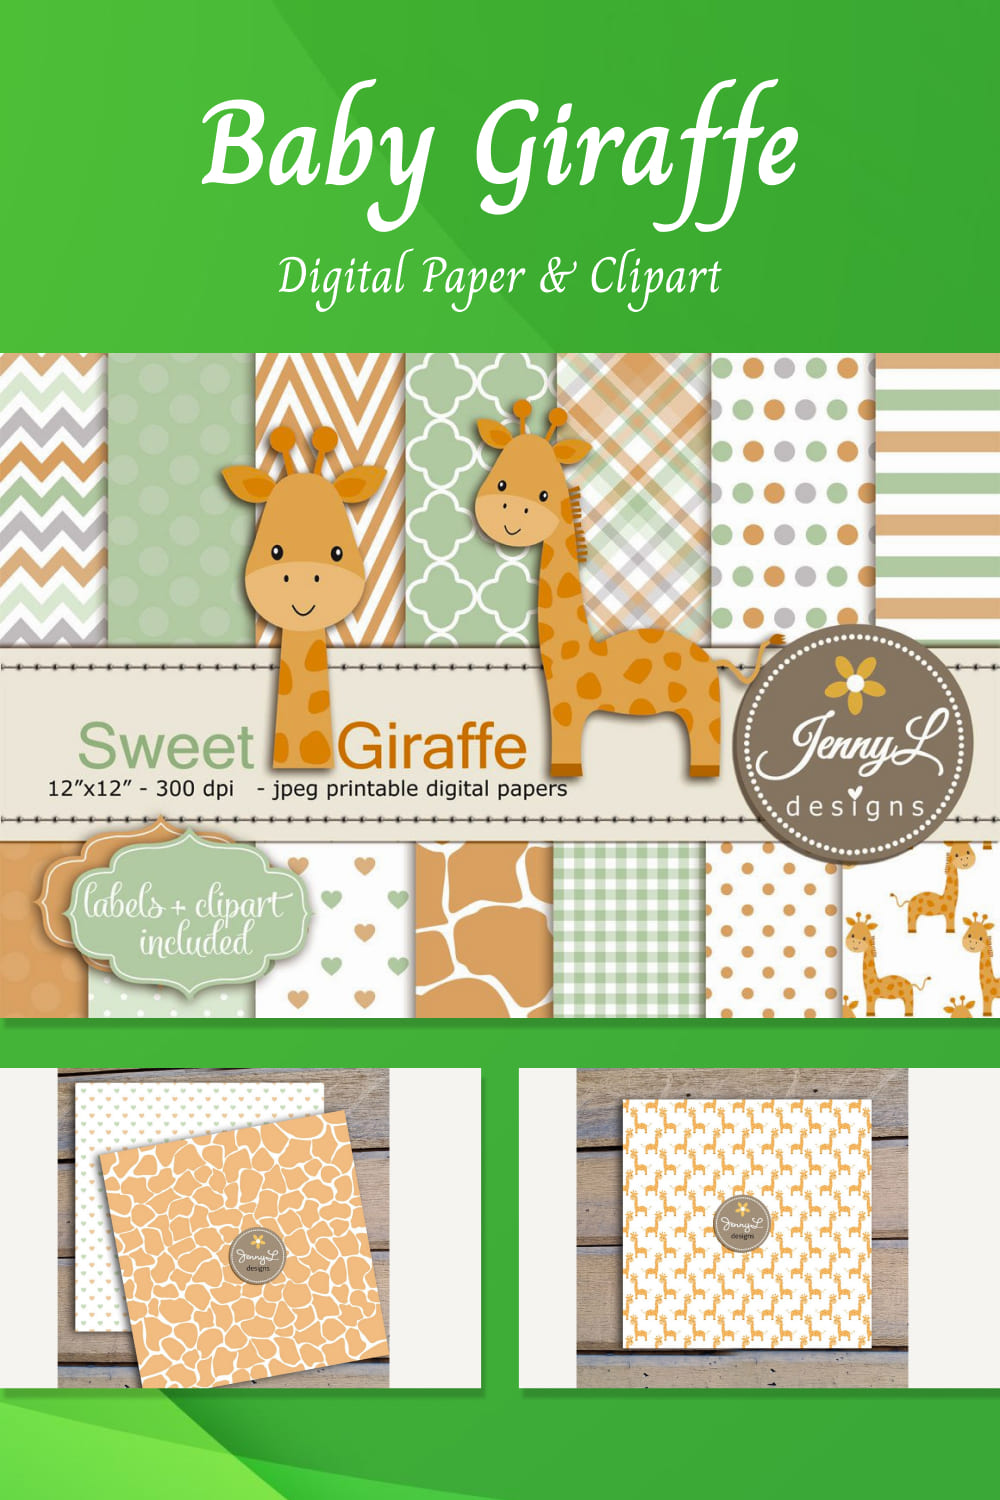 Get Well Soon Digital papers and Flower Bouquet Clipart By JennyL